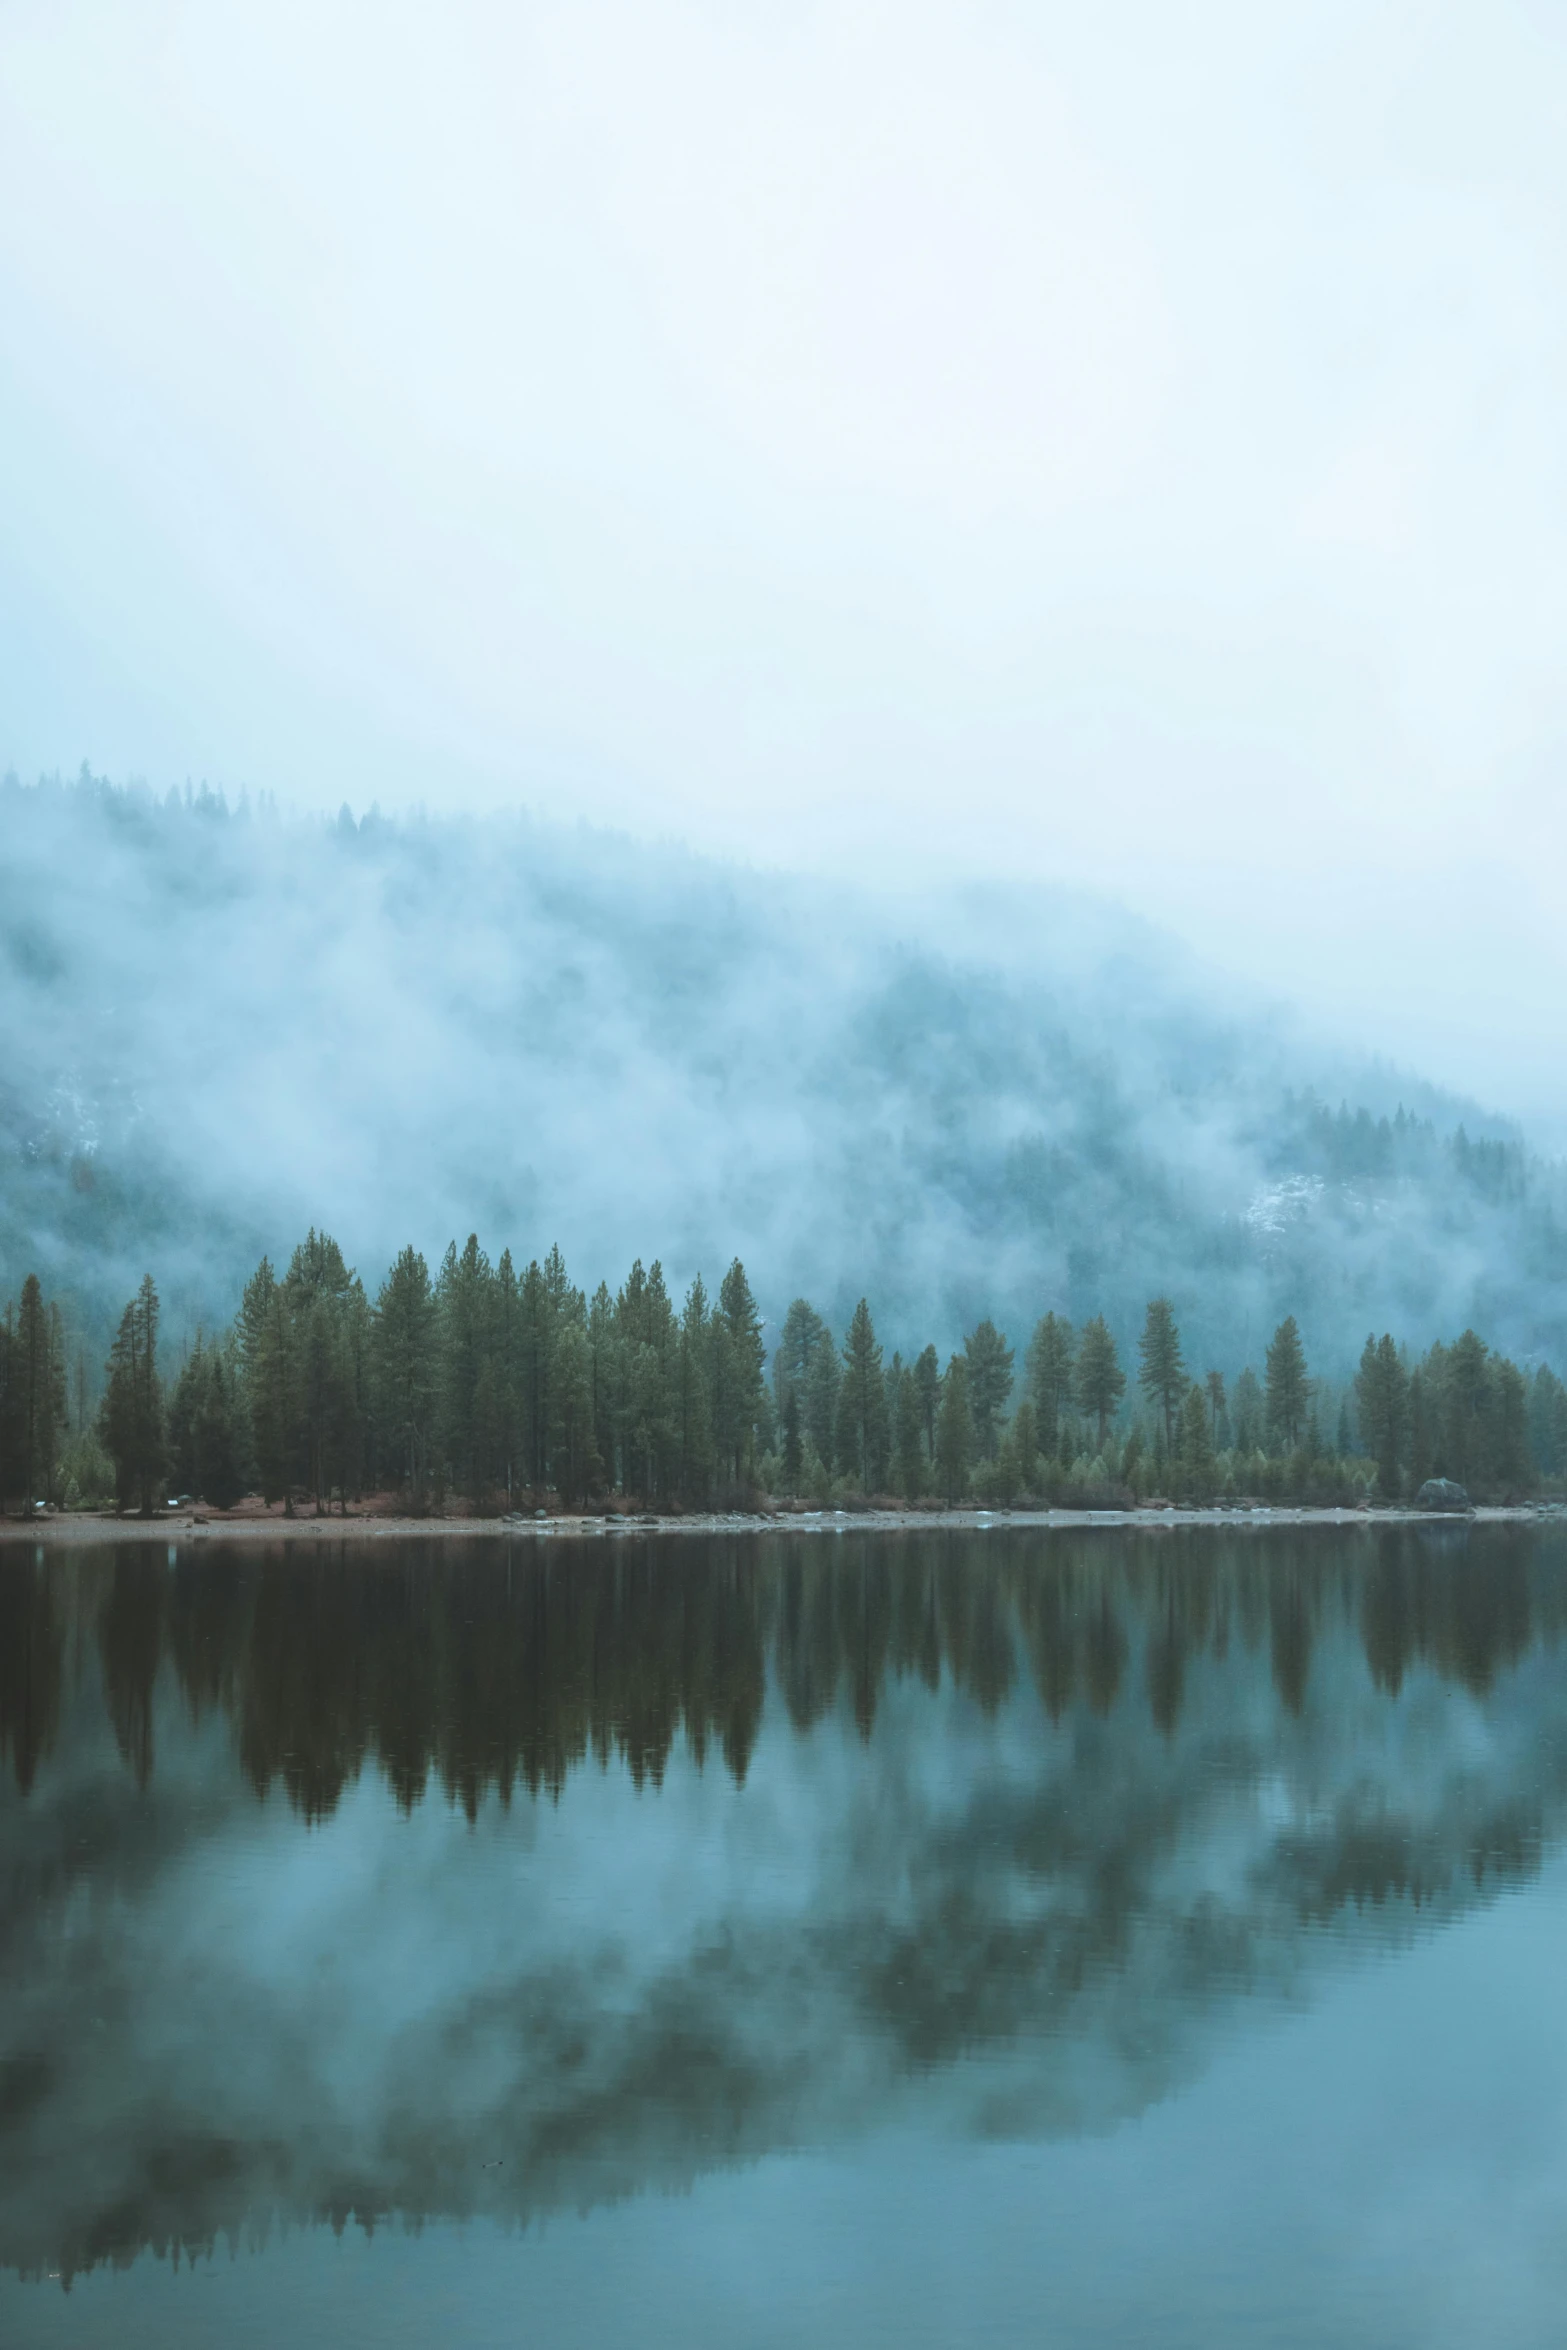 a body of water surrounded by trees on a foggy day, idaho, yosemite, trees reflecting on the lake, unsplash 4k